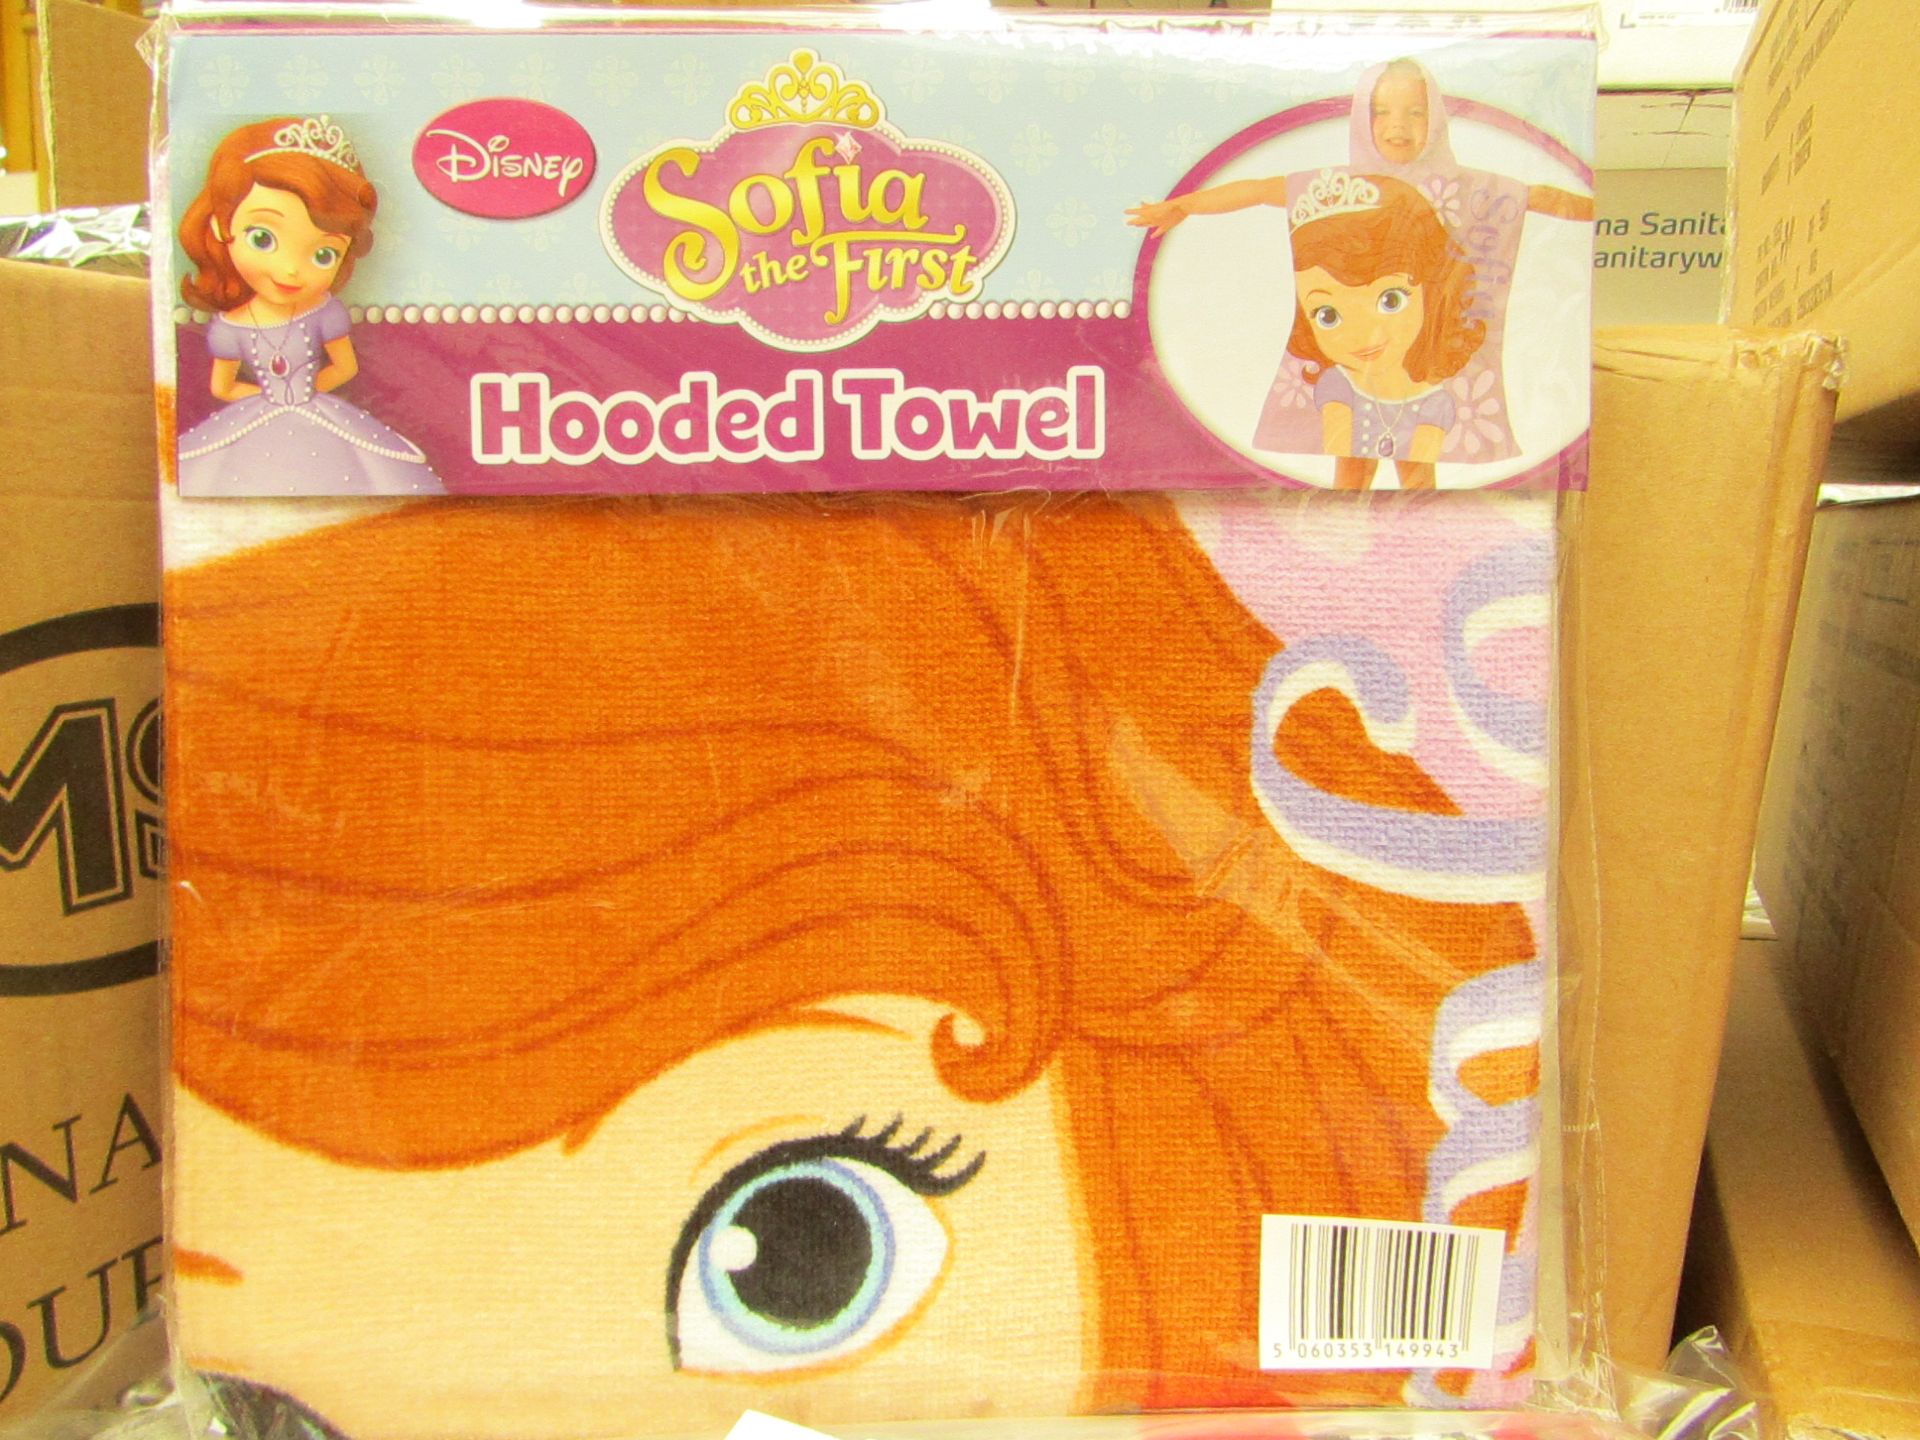 Disney Sofia the First hooded towel, new and packaged.